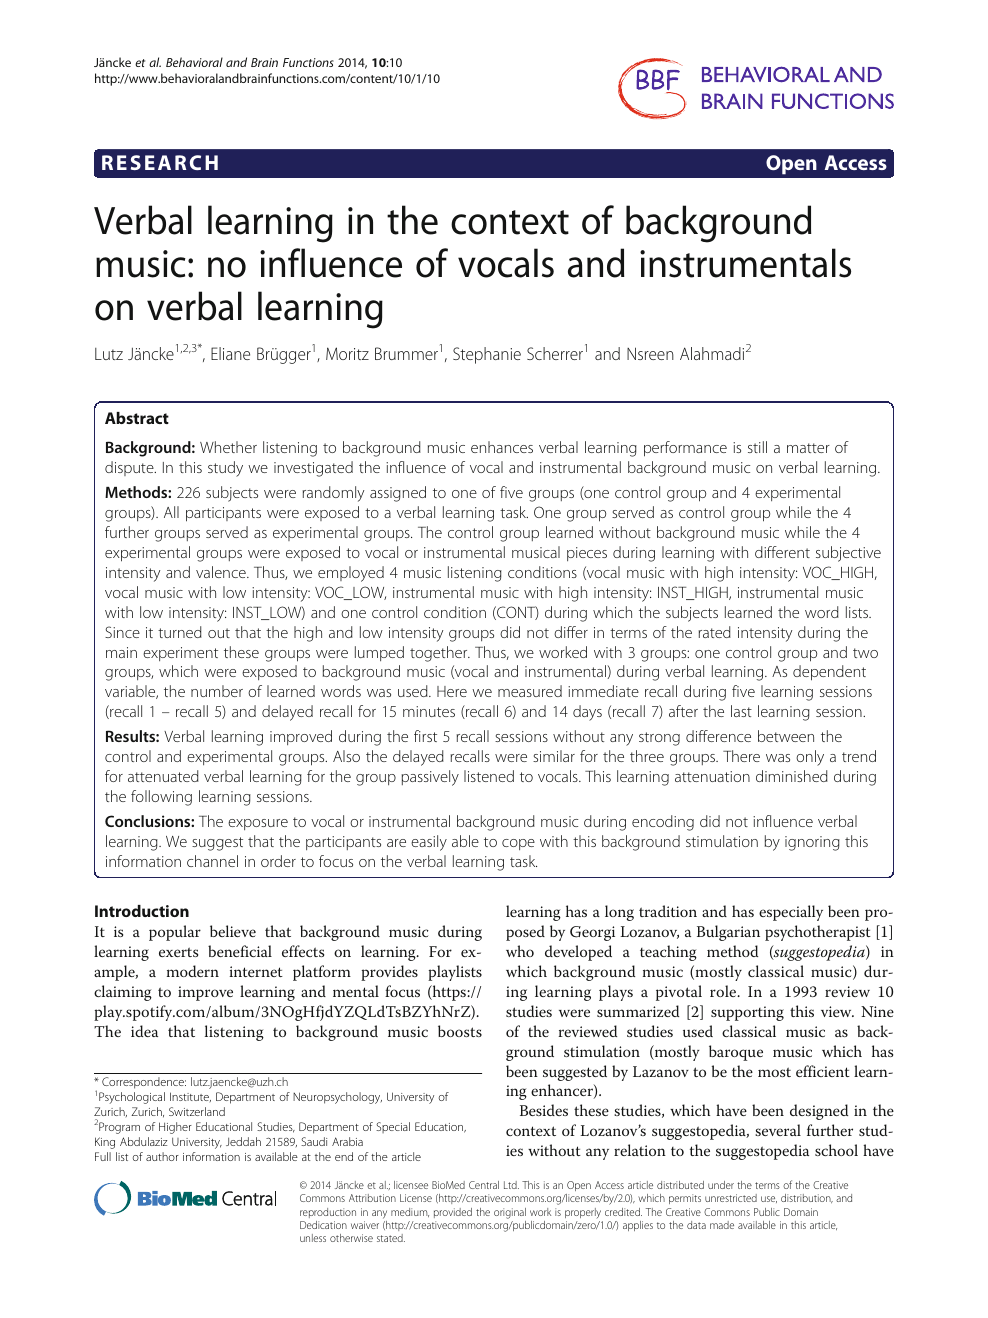 Verbal learning in the context of background music: no influence of vocals  and instrumentals on verbal learning – topic of research paper in Clinical  medicine. Download scholarly article PDF and read for